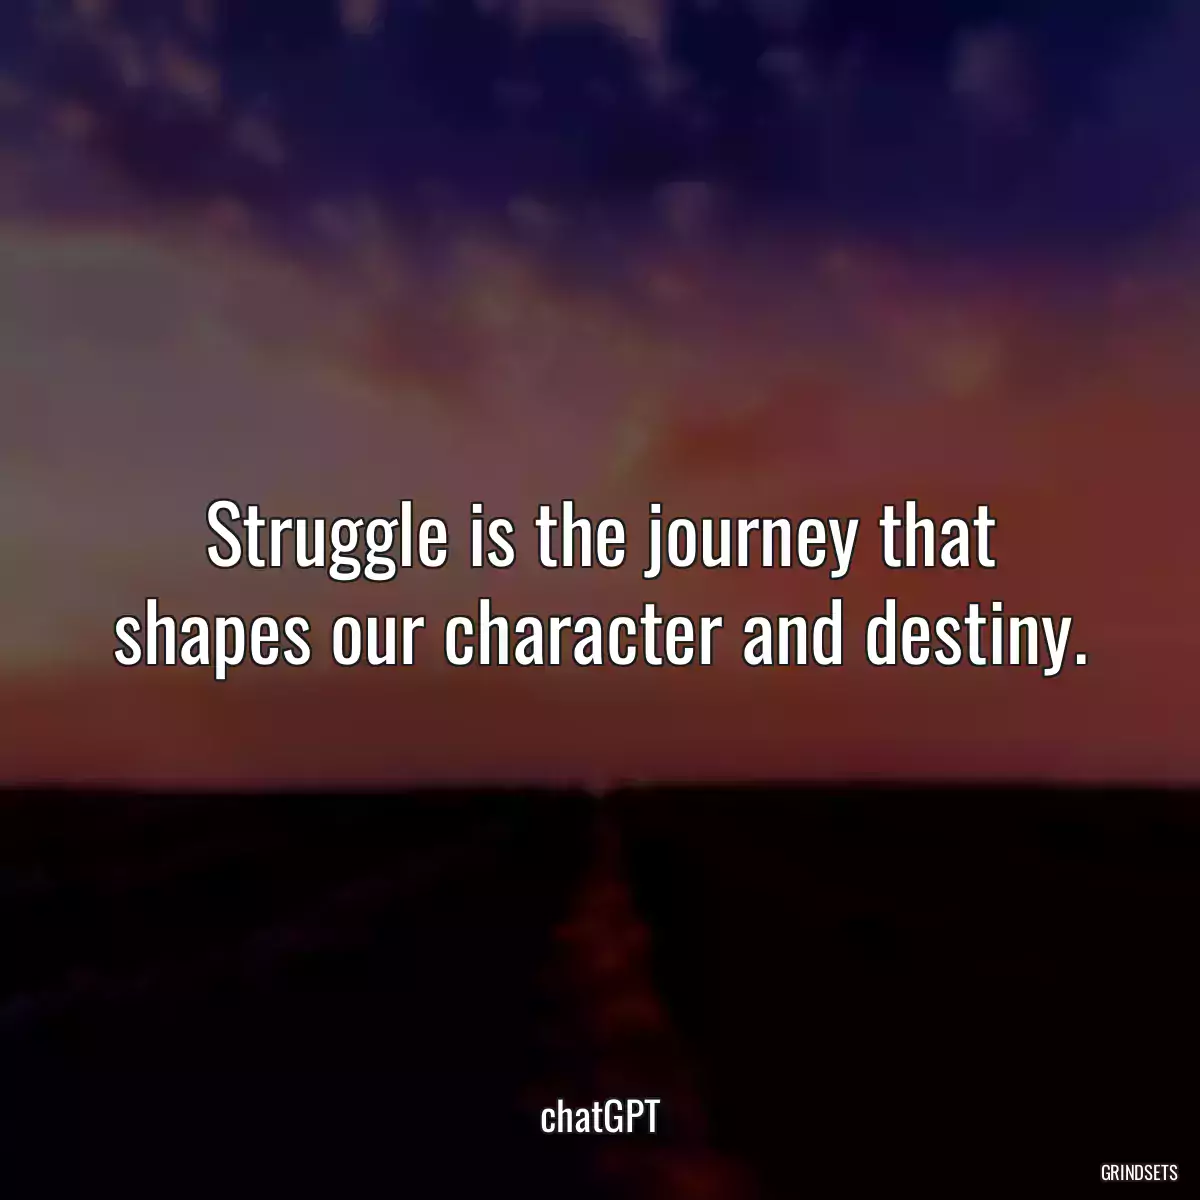 Struggle is the journey that shapes our character and destiny.